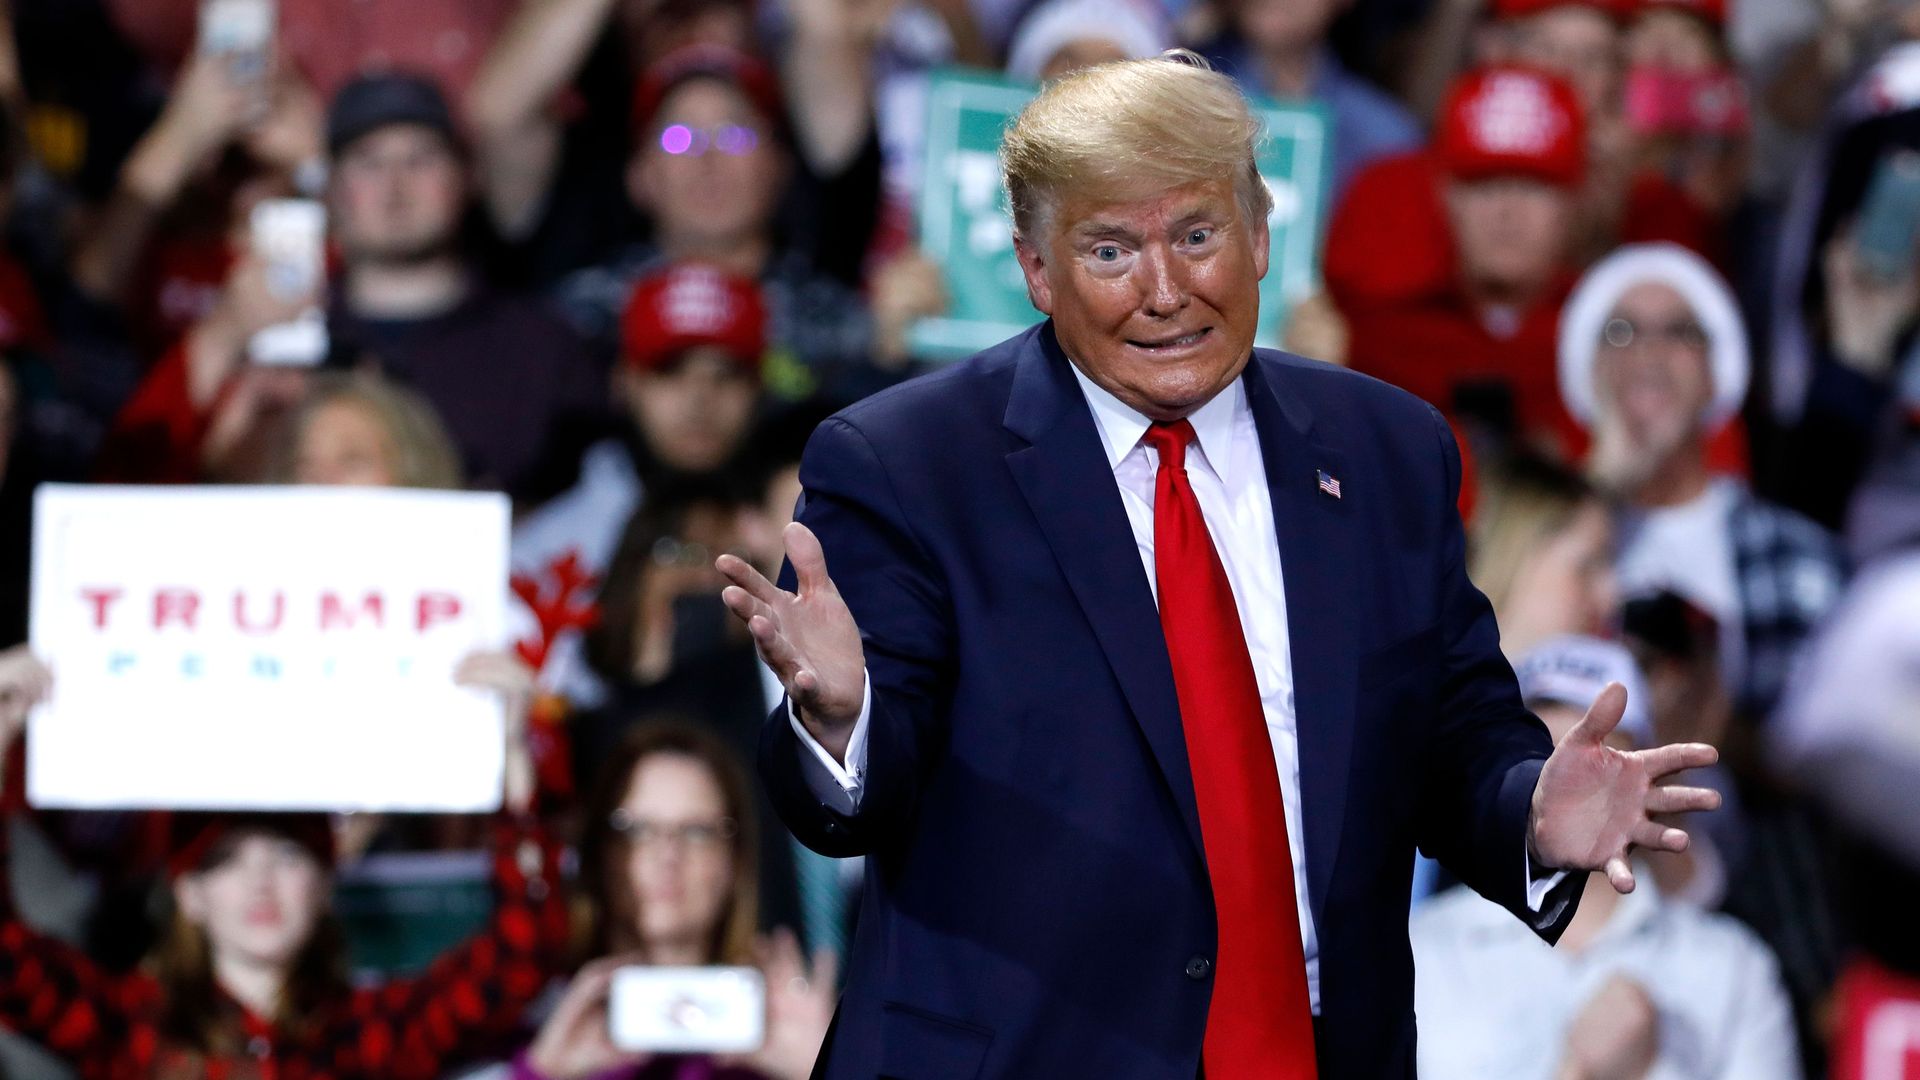 President Donald Trump speaks during a Keep America Great Rally at Kellogg Arena December 18, 2019, in Battle Creek, Michigan.